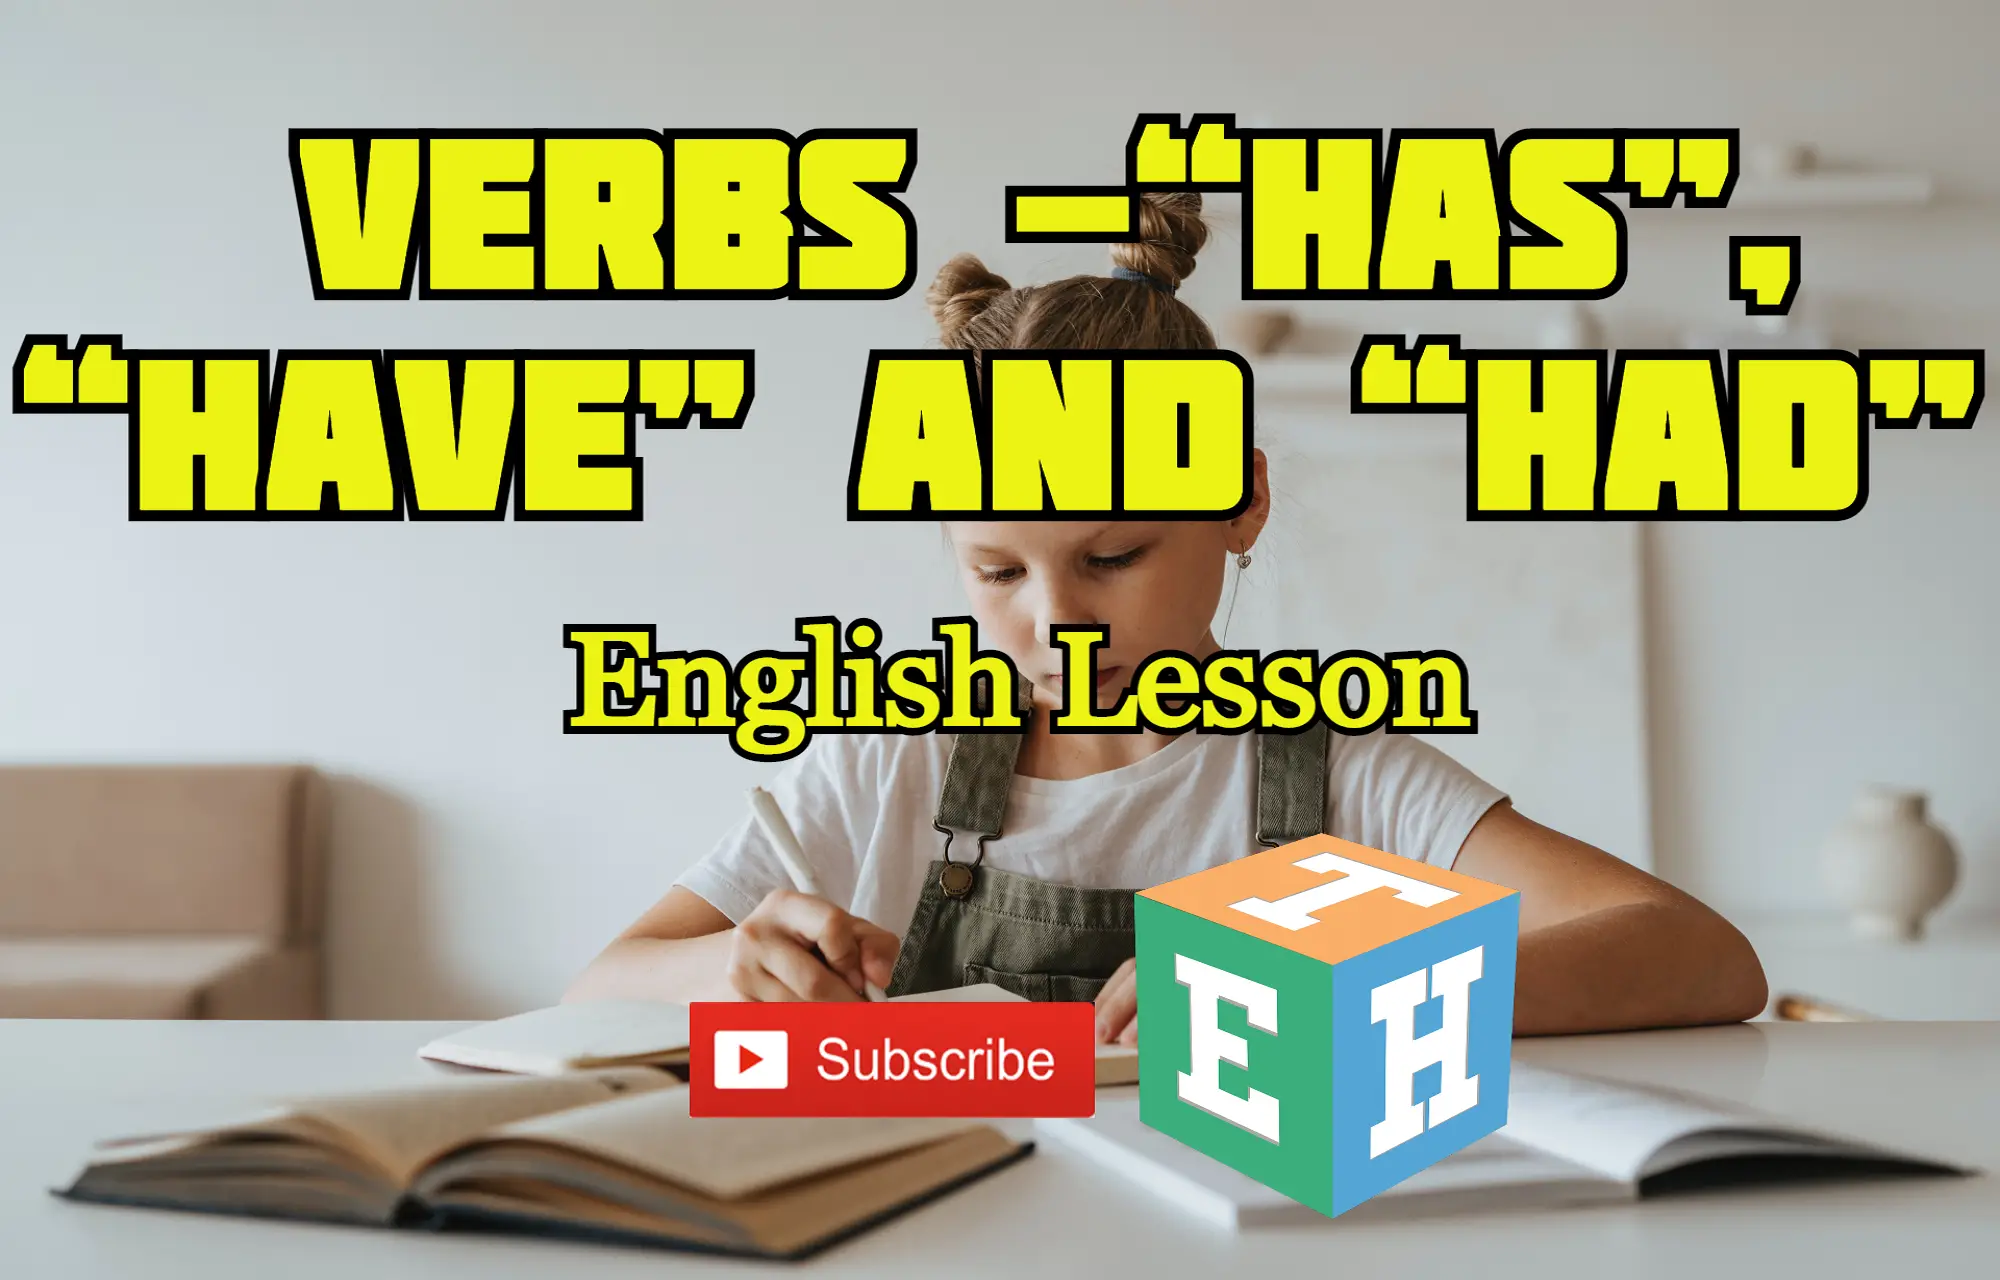 VERBS - “HAS” “HAVE” AND “HAD”